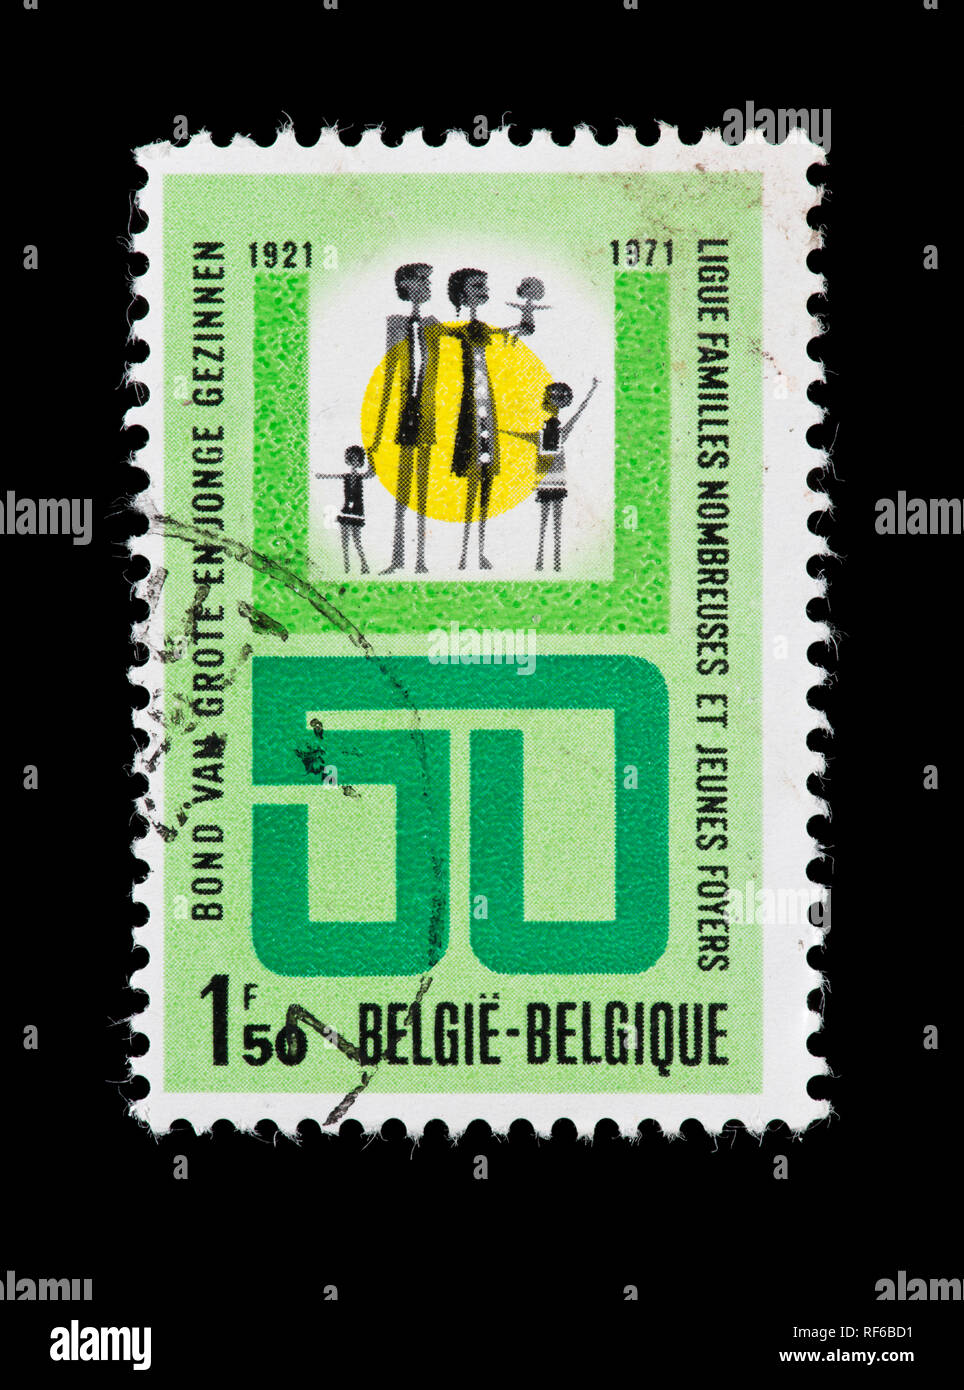 Postage stamp from Belgium depicting a family and a 50, issued for the 50th anniversary of the Belgian Large Family League. Stock Photo